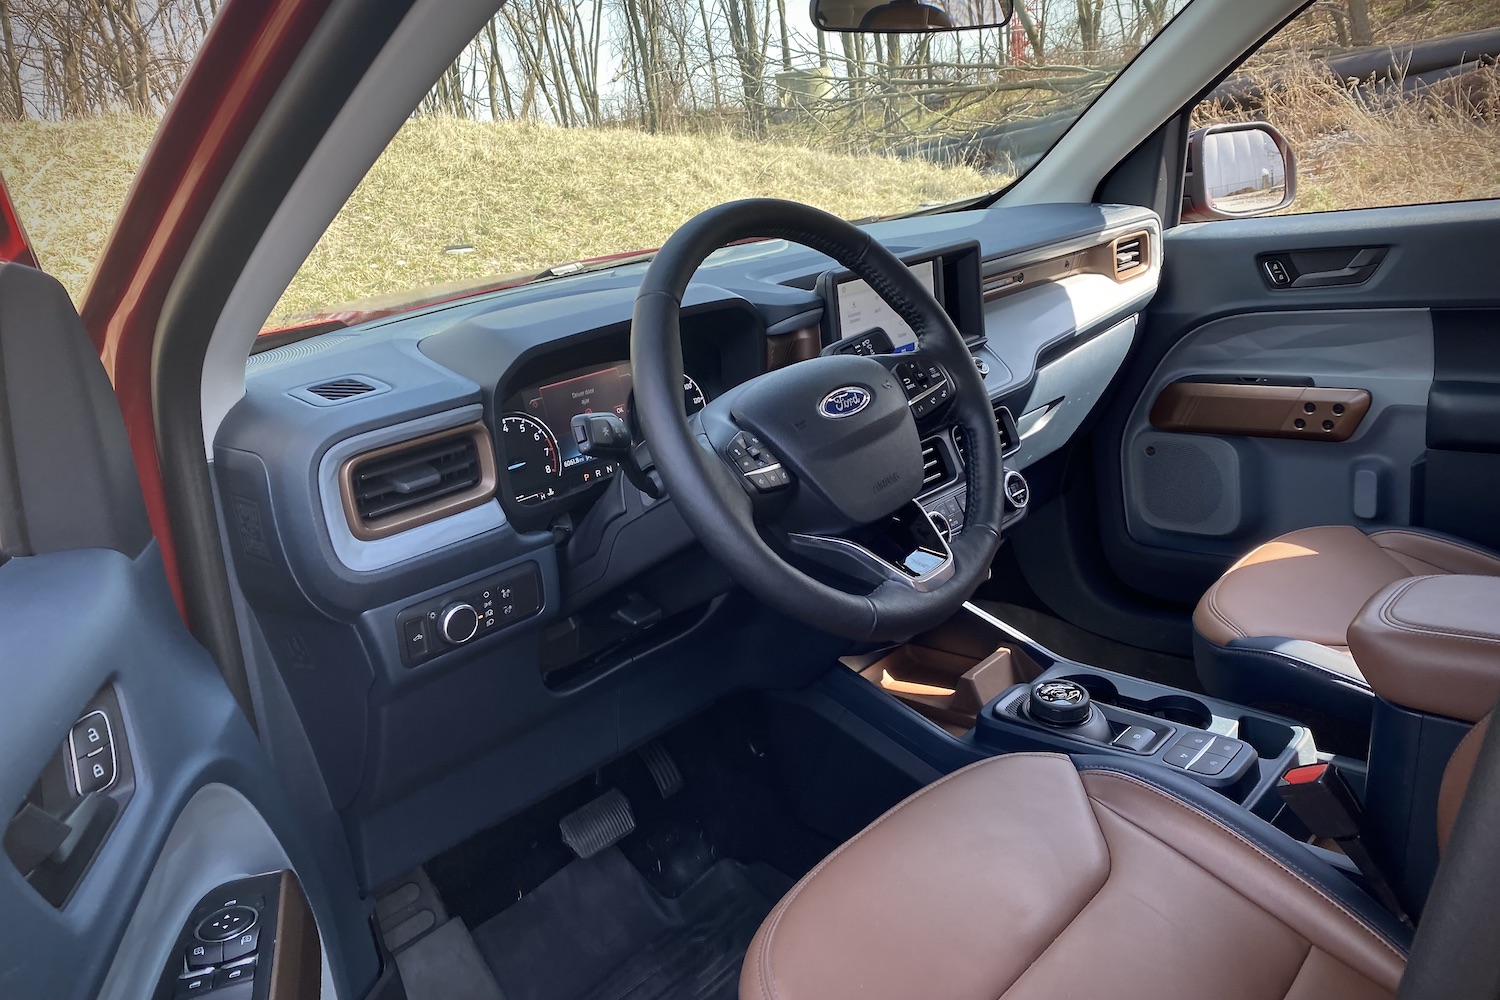 2022 Ford Maverick steering wheel and dashboard from outside the vehicle with grass in the back